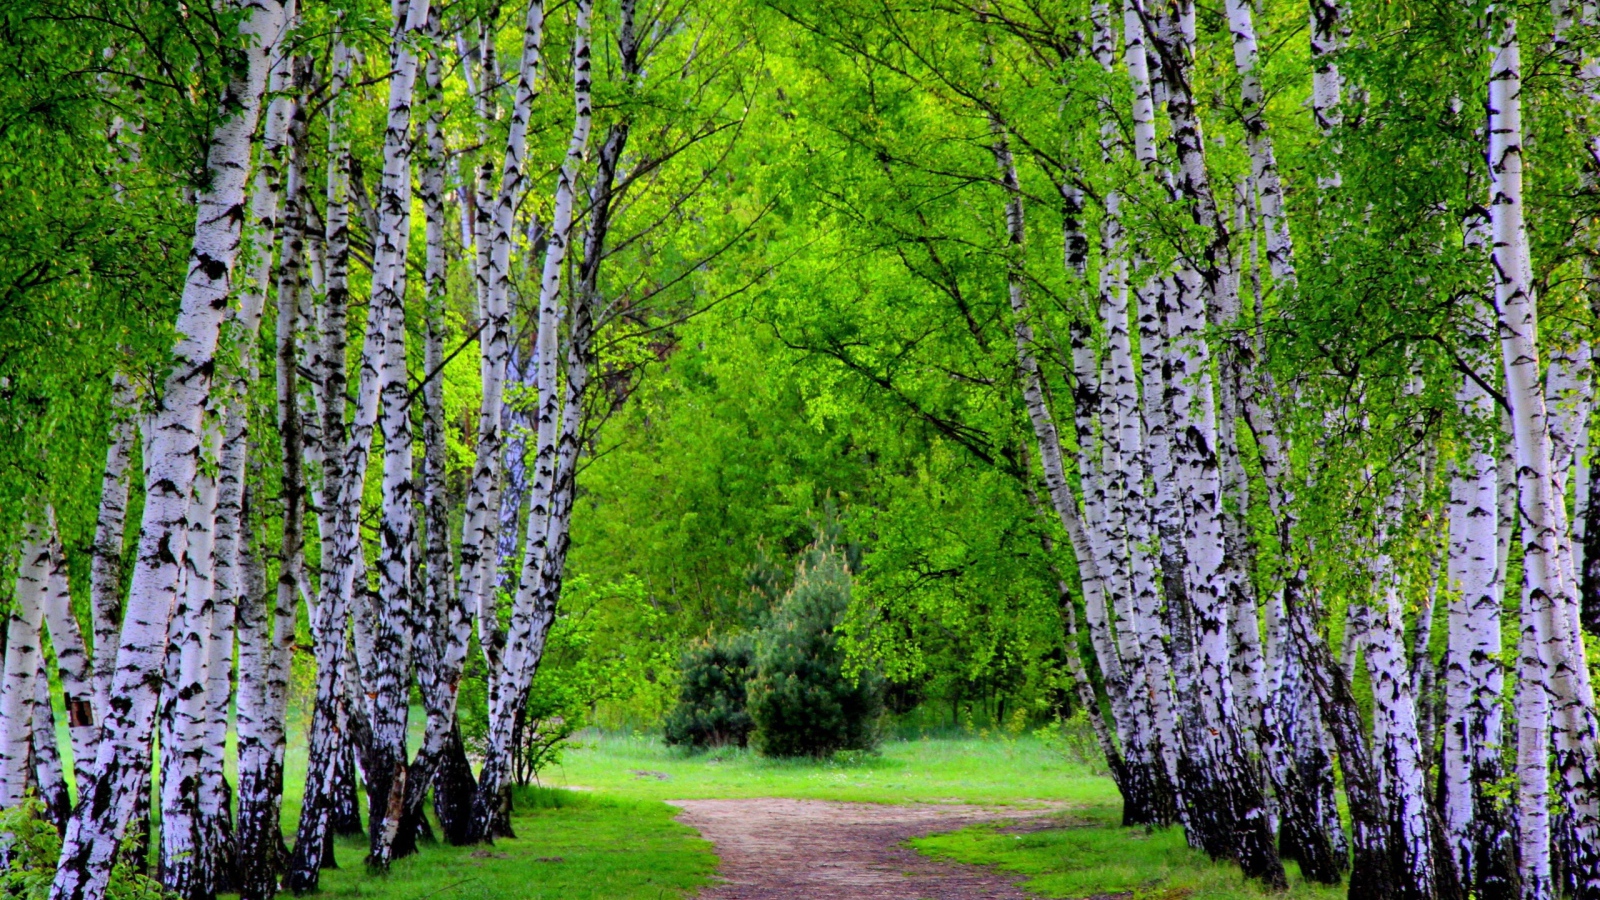 Alley of birch trees